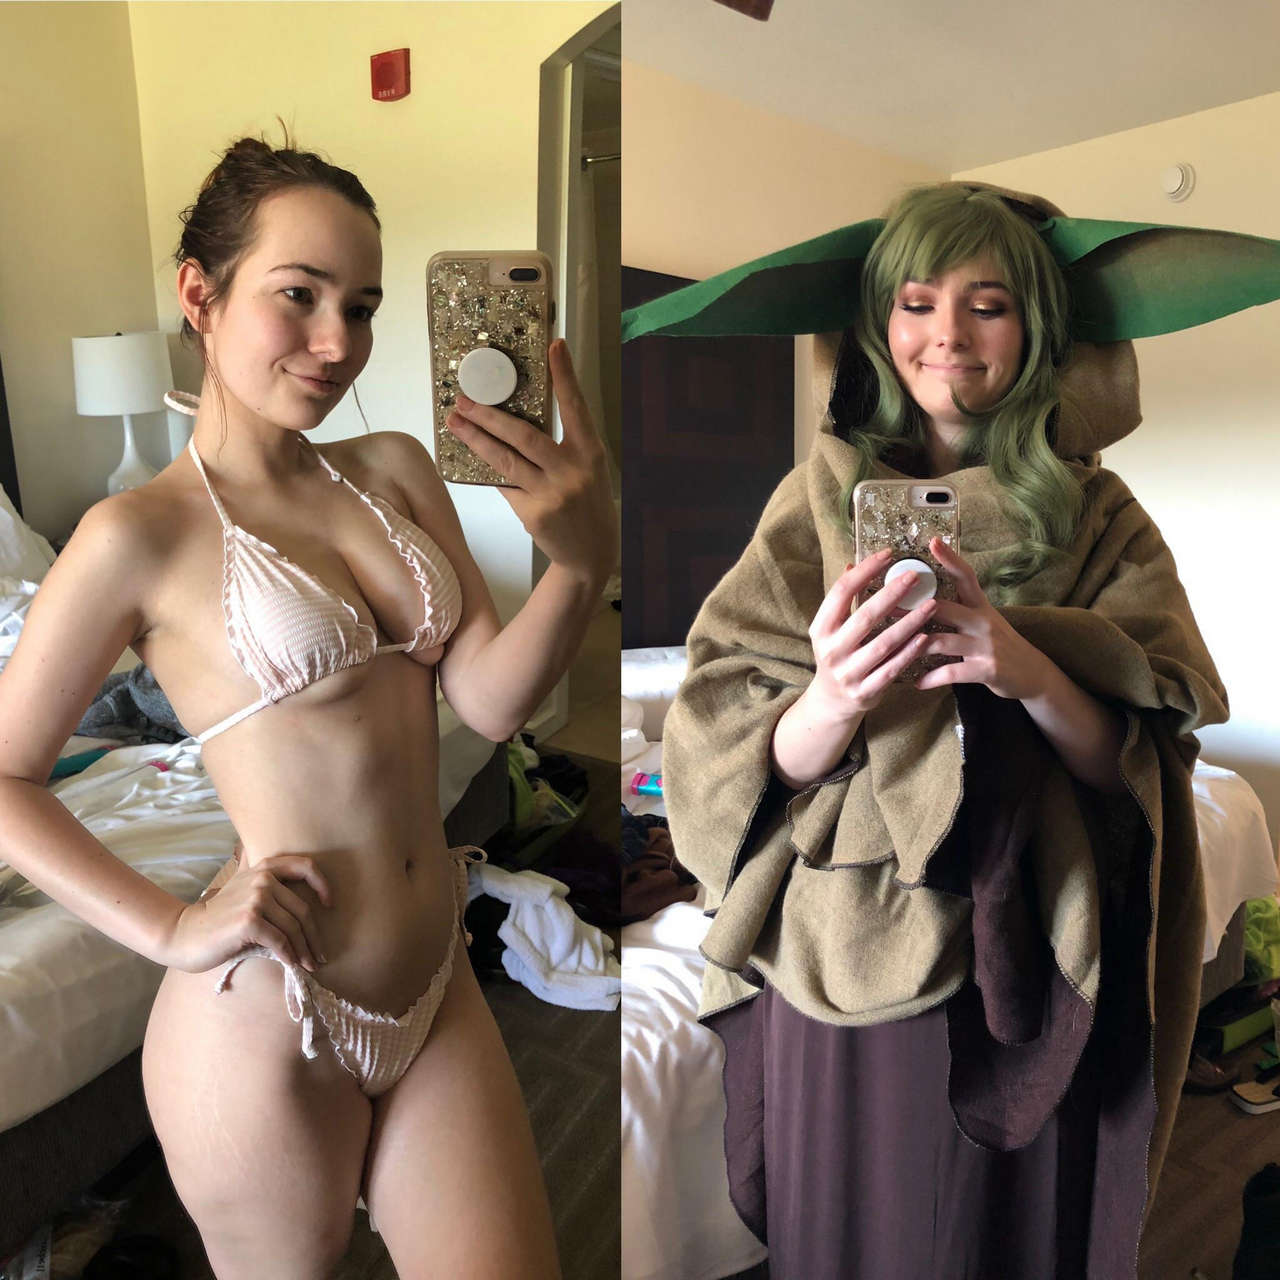 Baby Yoda Kinda Thicc Under Those Robes Tho By Omgcospla